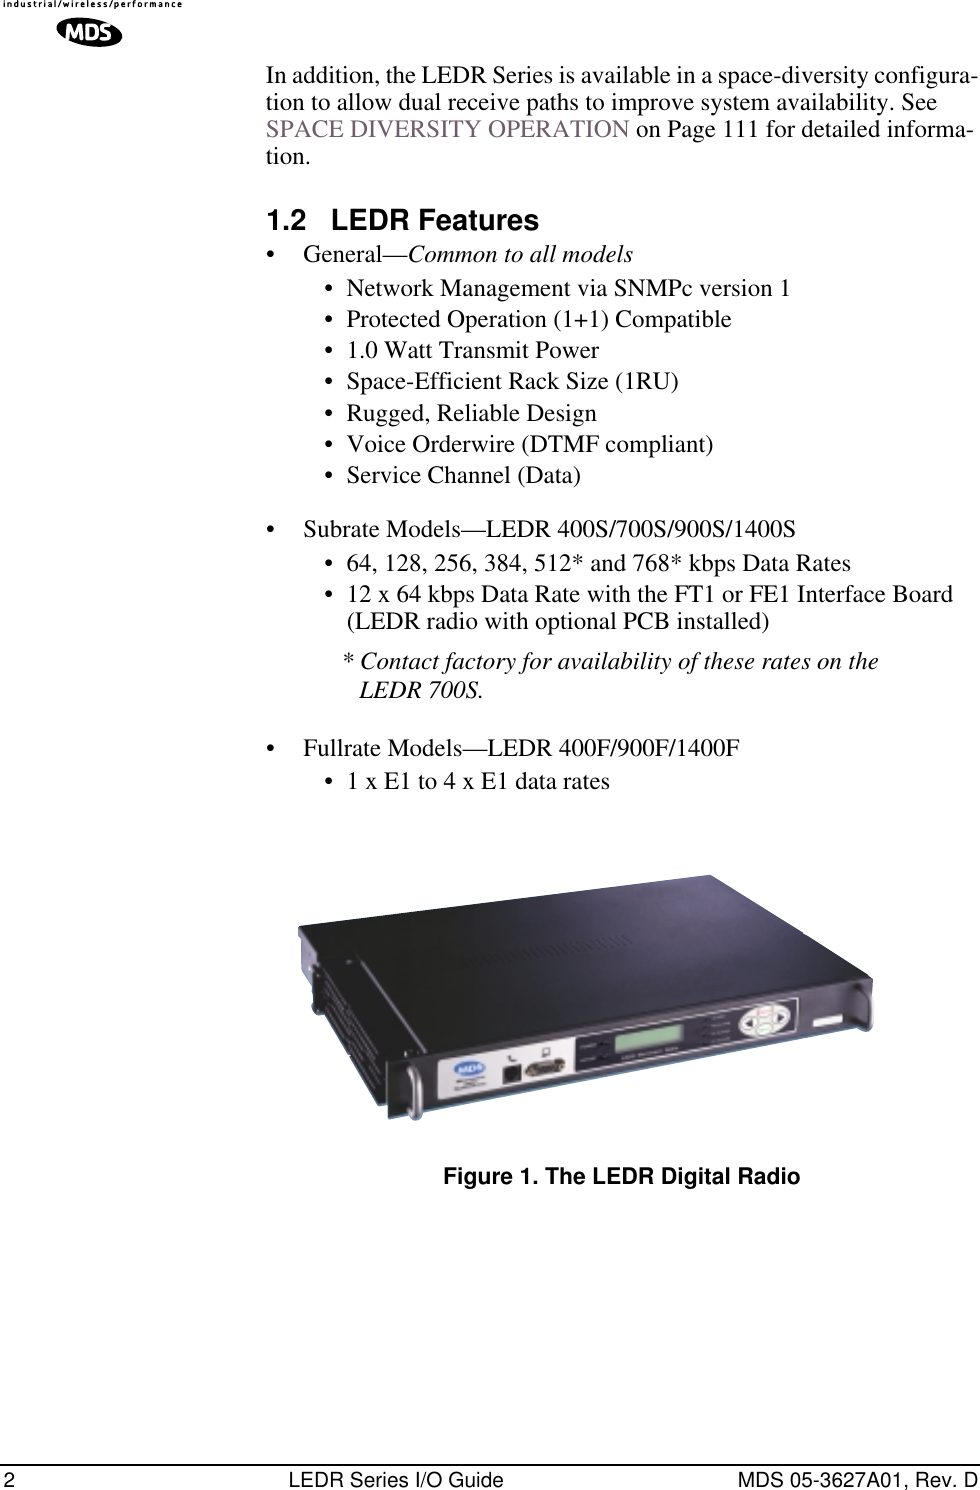  2 LEDR Series I/O Guide MDS 05-3627A01, Rev. D In addition, the LEDR Series is available in a space-diversity configura-tion to allow dual receive paths to improve system availability. See SPACE DIVERSITY OPERATION on Page 111 for detailed informa-tion. 1.2 LEDR Features • General— Common to all models • Network Management via SNMPc version 1• Protected Operation (1+1) Compatible• 1.0 Watt Transmit Power• Space-Efficient Rack Size (1RU)• Rugged, Reliable Design• Voice Orderwire (DTMF compliant)• Service Channel (Data)• Subrate Models—LEDR 400S/700S/900S/1400S• 64, 128, 256, 384, 512* and 768* kbps Data Rates• 12 x 64 kbps Data Rate with the FT1 or FE1 Interface Board (LEDR radio with optional PCB installed) * Contact factory for availability of these rates on the LEDR 700S. • Fullrate Models—LEDR 400F/900F/1400F• 1 x E1 to 4 x E1 data rates Invisible place holder Figure 1. The LEDR Digital Radio